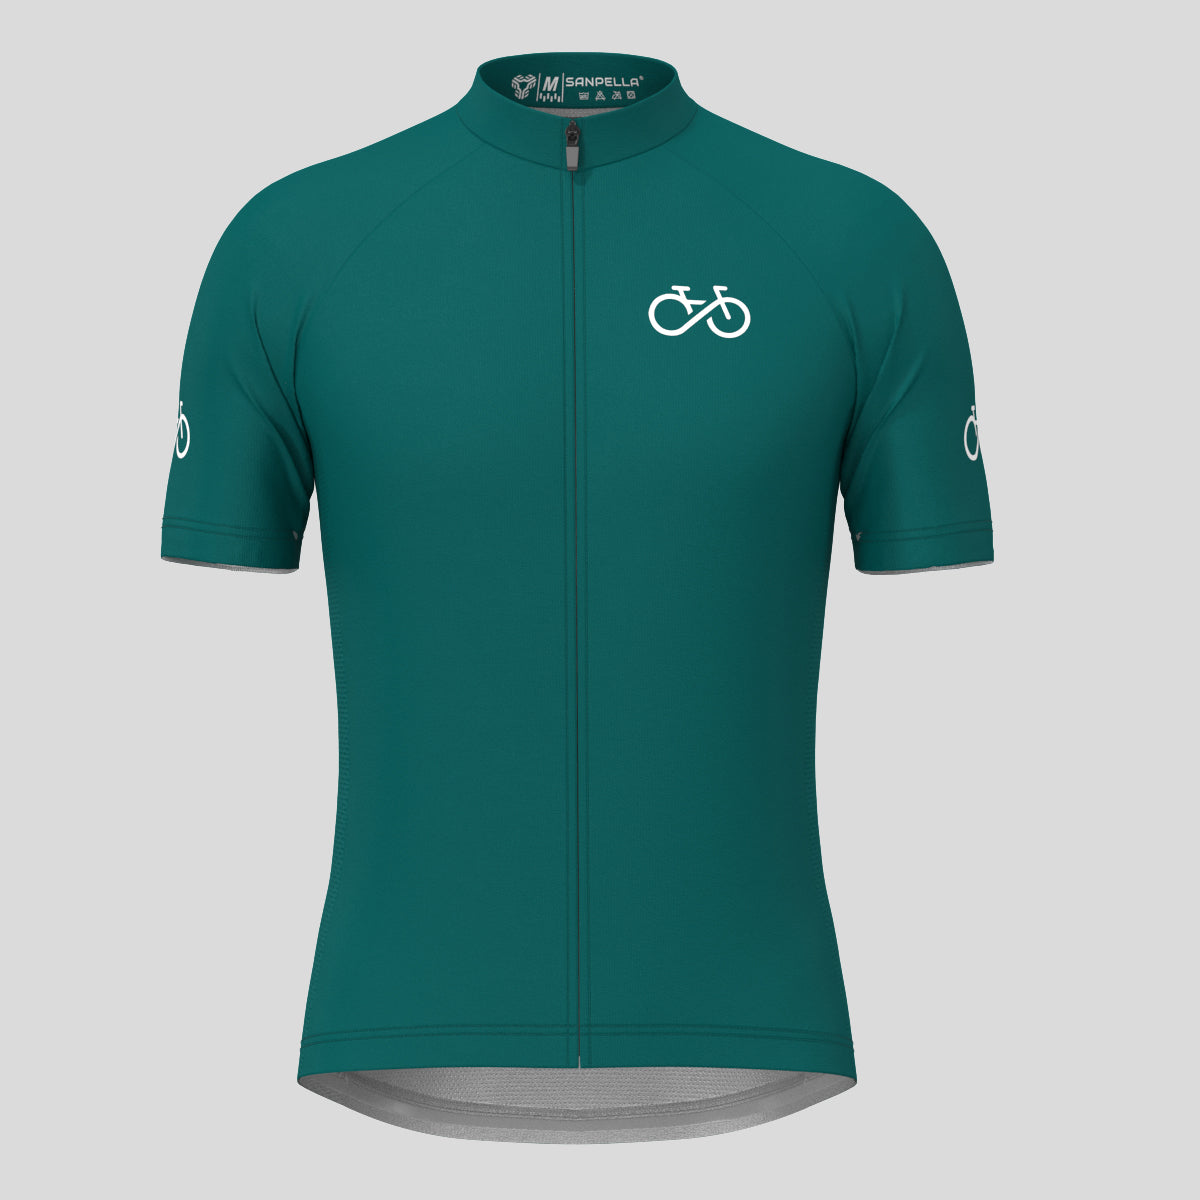 Ride Forever Men's Cycling Jersey -Midnight